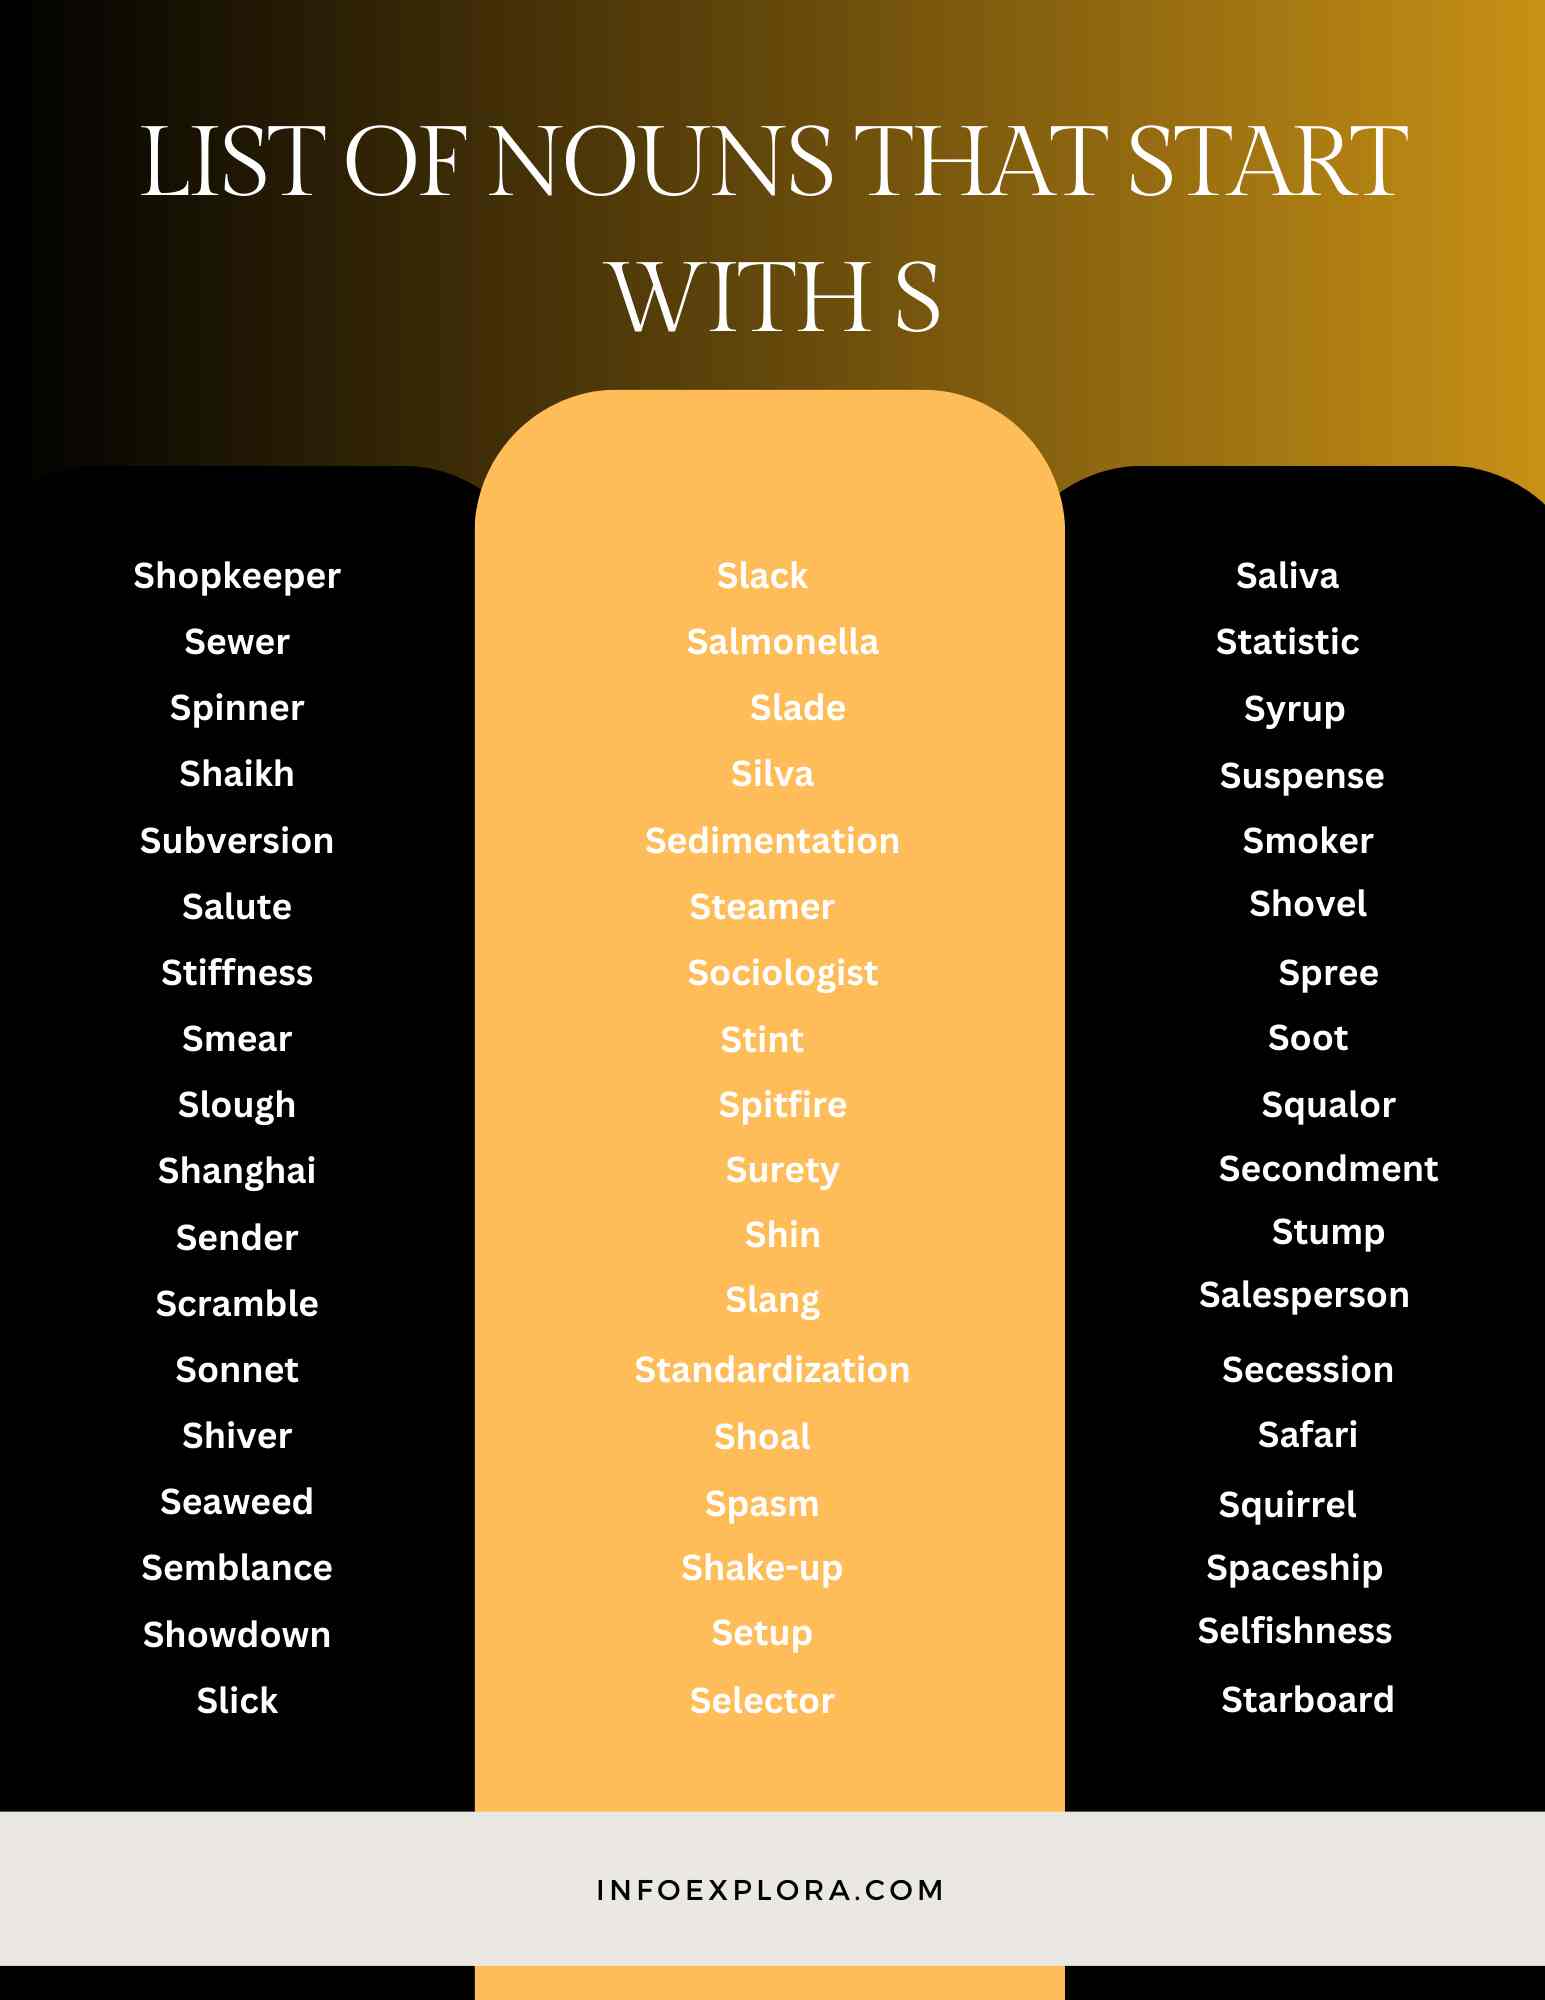 Nouns that Start With S